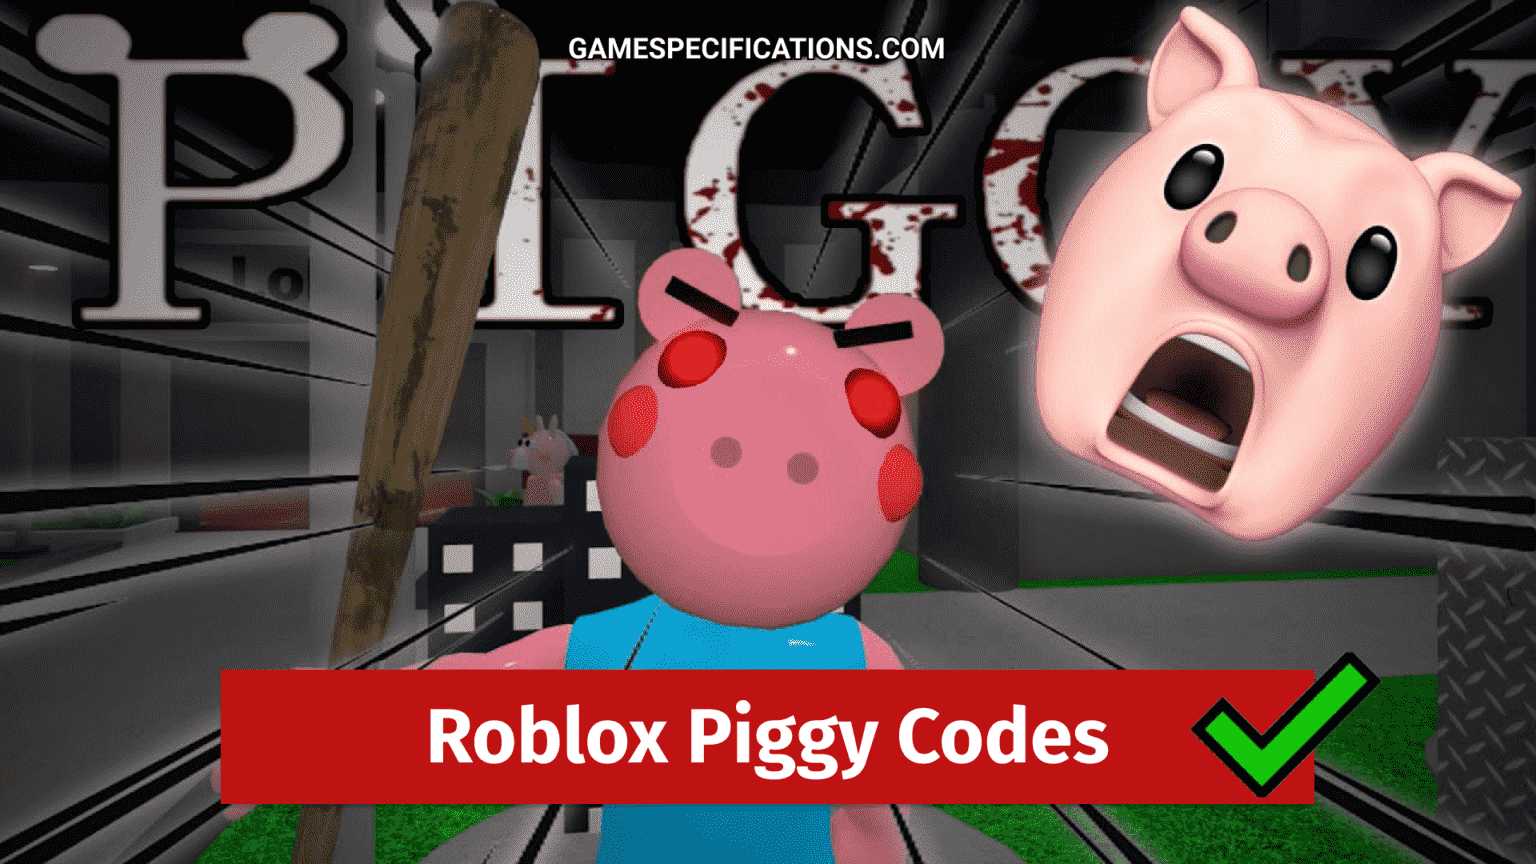 roblox-piggy-codes-to-get-free-coins-gems-pets-september-2023-game-specifications